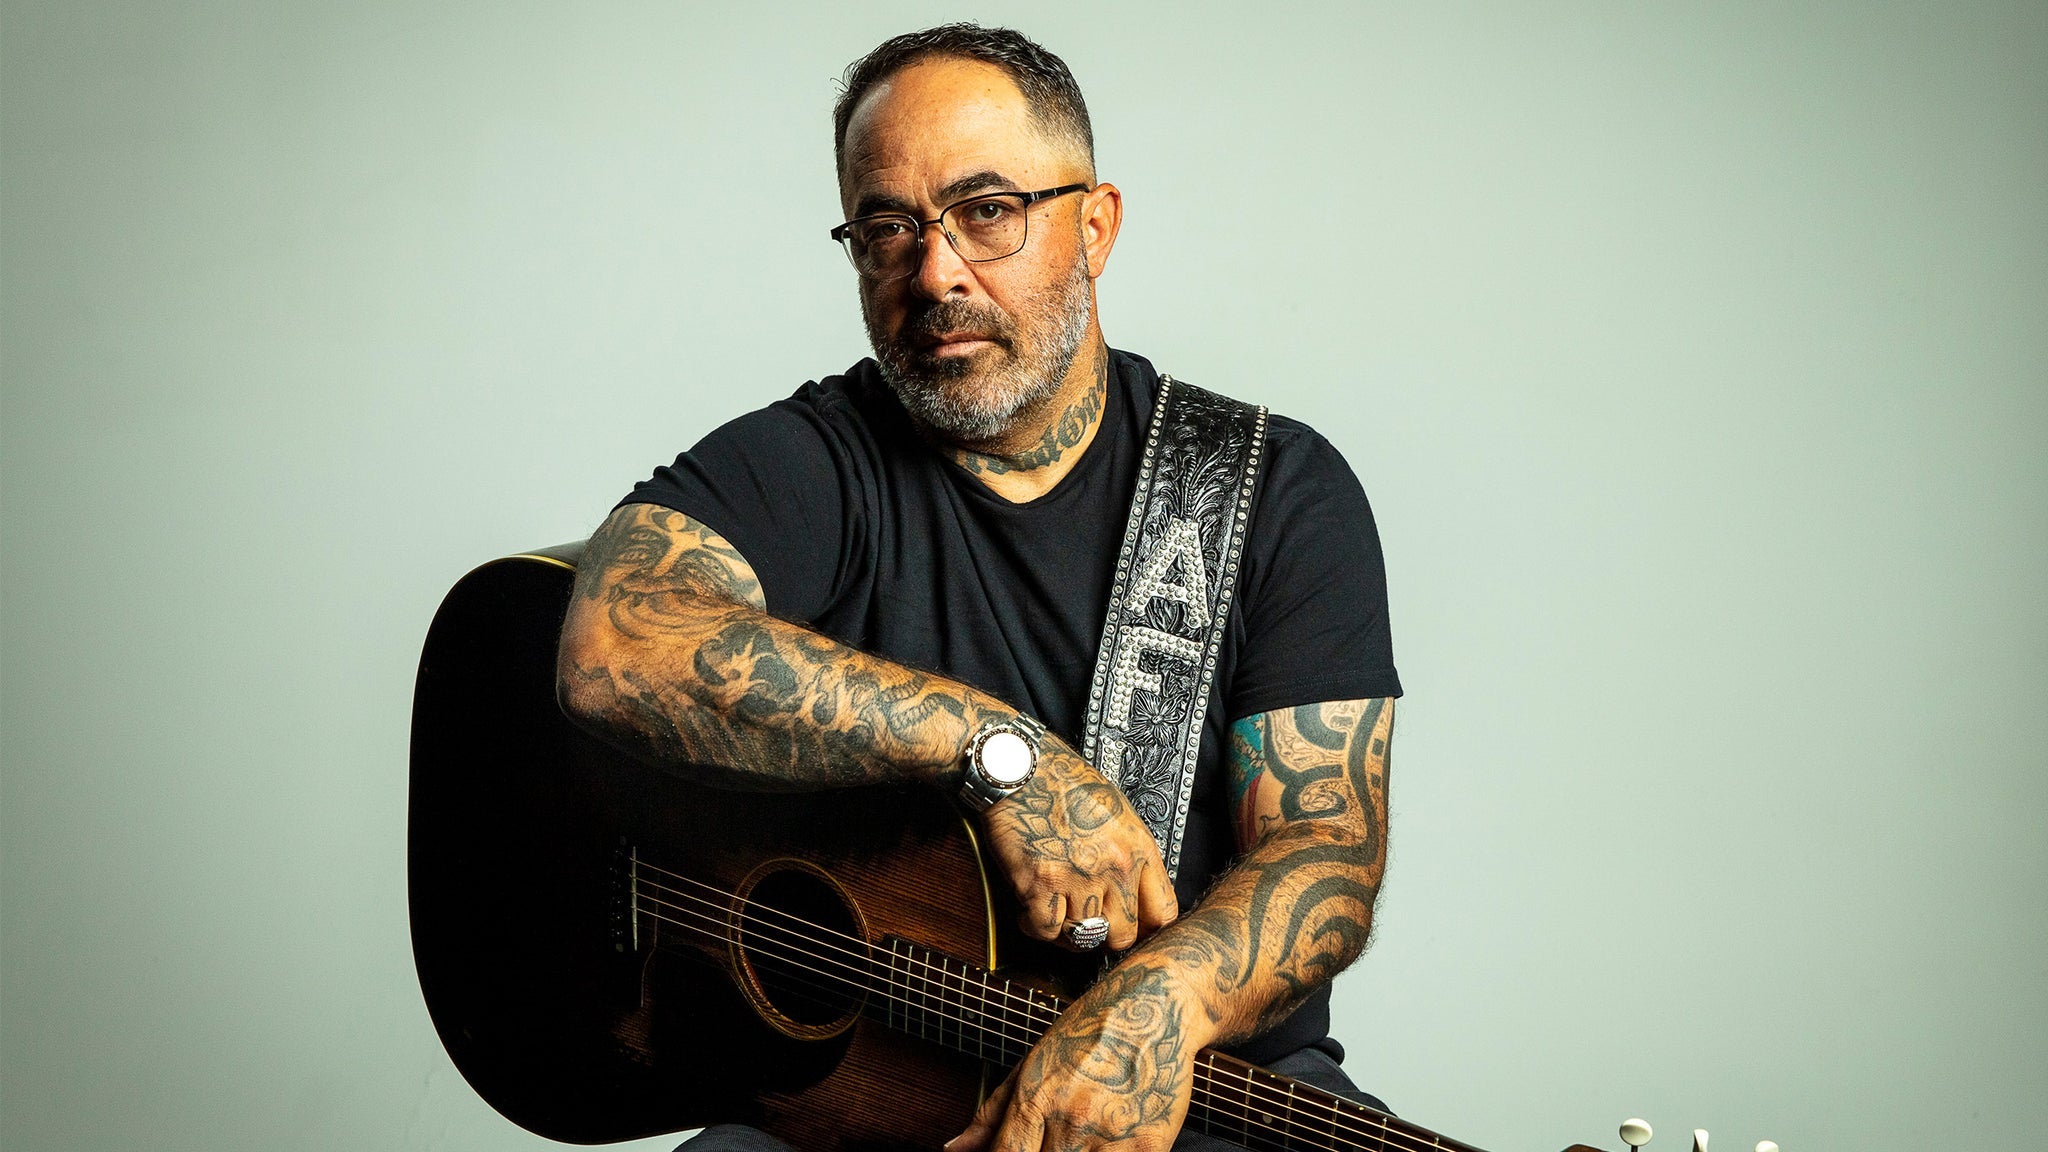 Aaron Lewis at Harrah's Resort SoCal - The Events Center